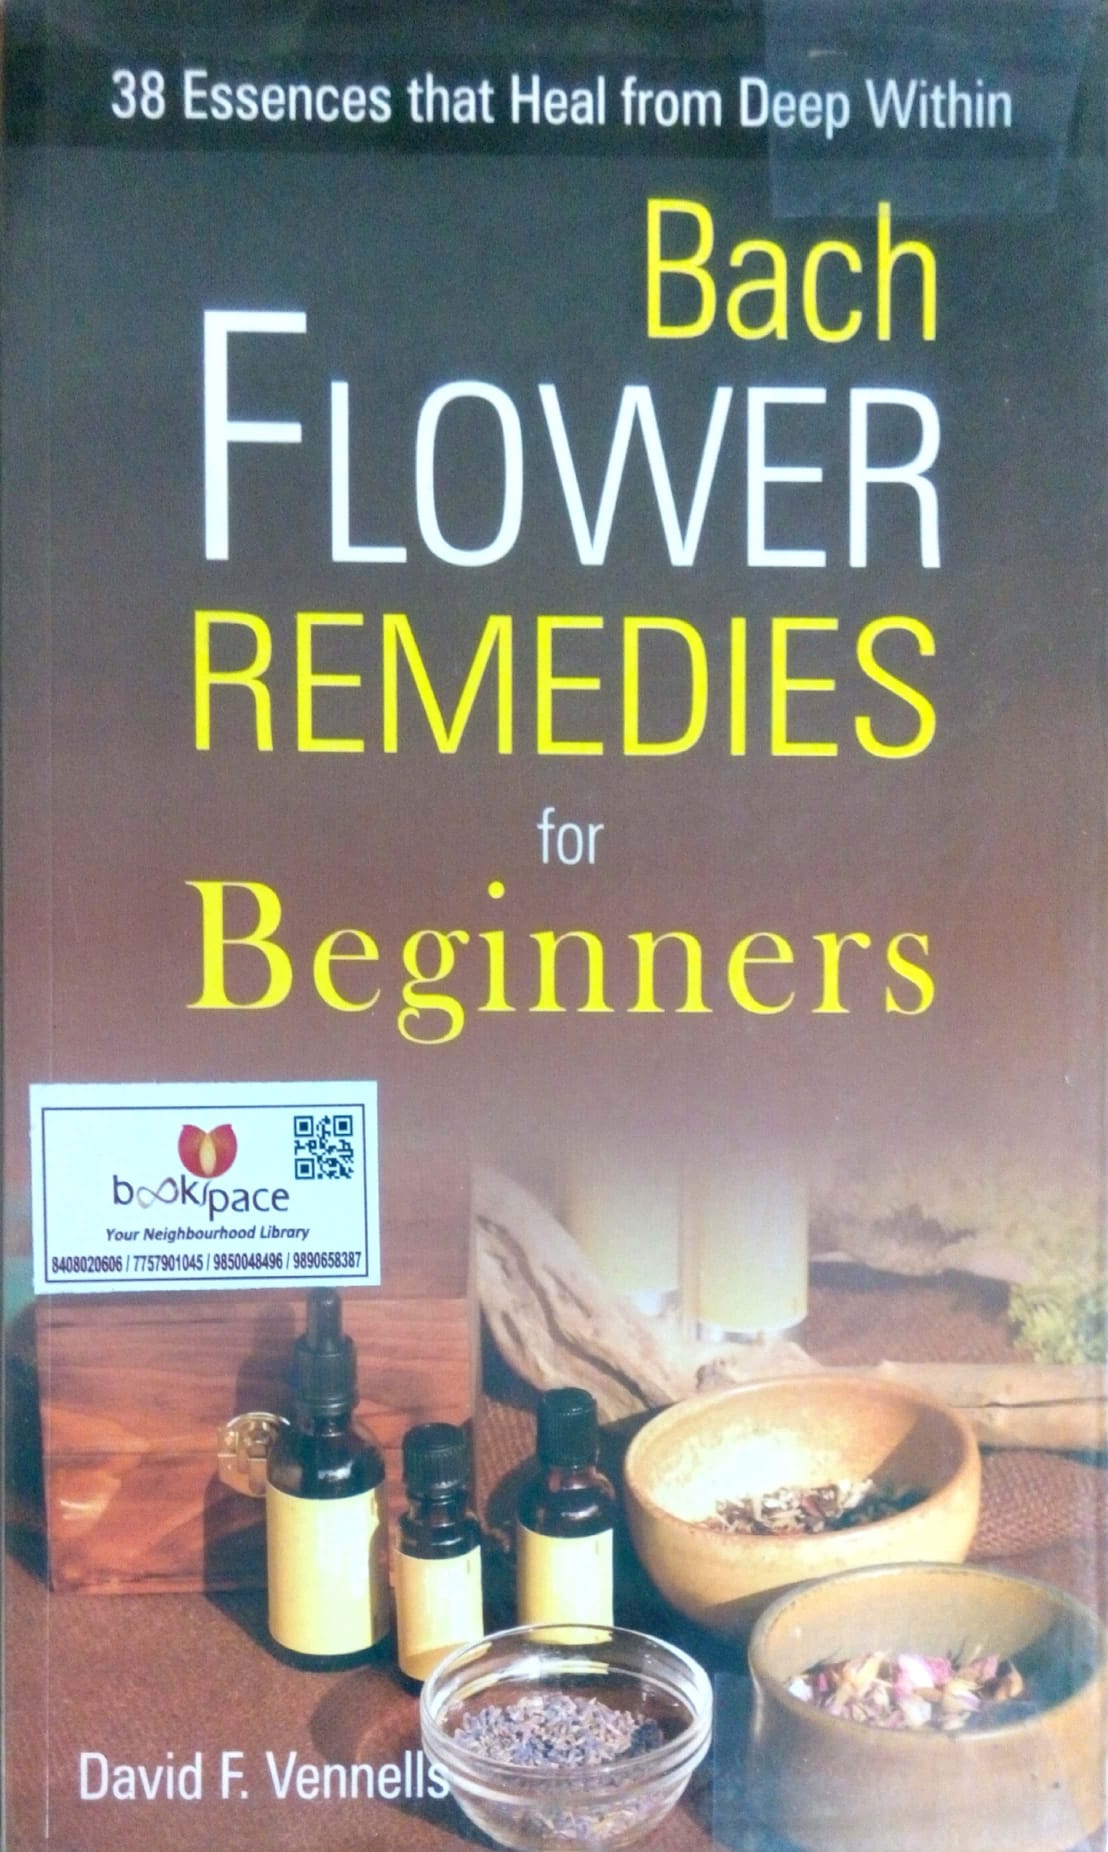 Bach flower remedies for beginners by David Vennells  Half Price Books India Books inspire-bookspace.myshopify.com Half Price Books India